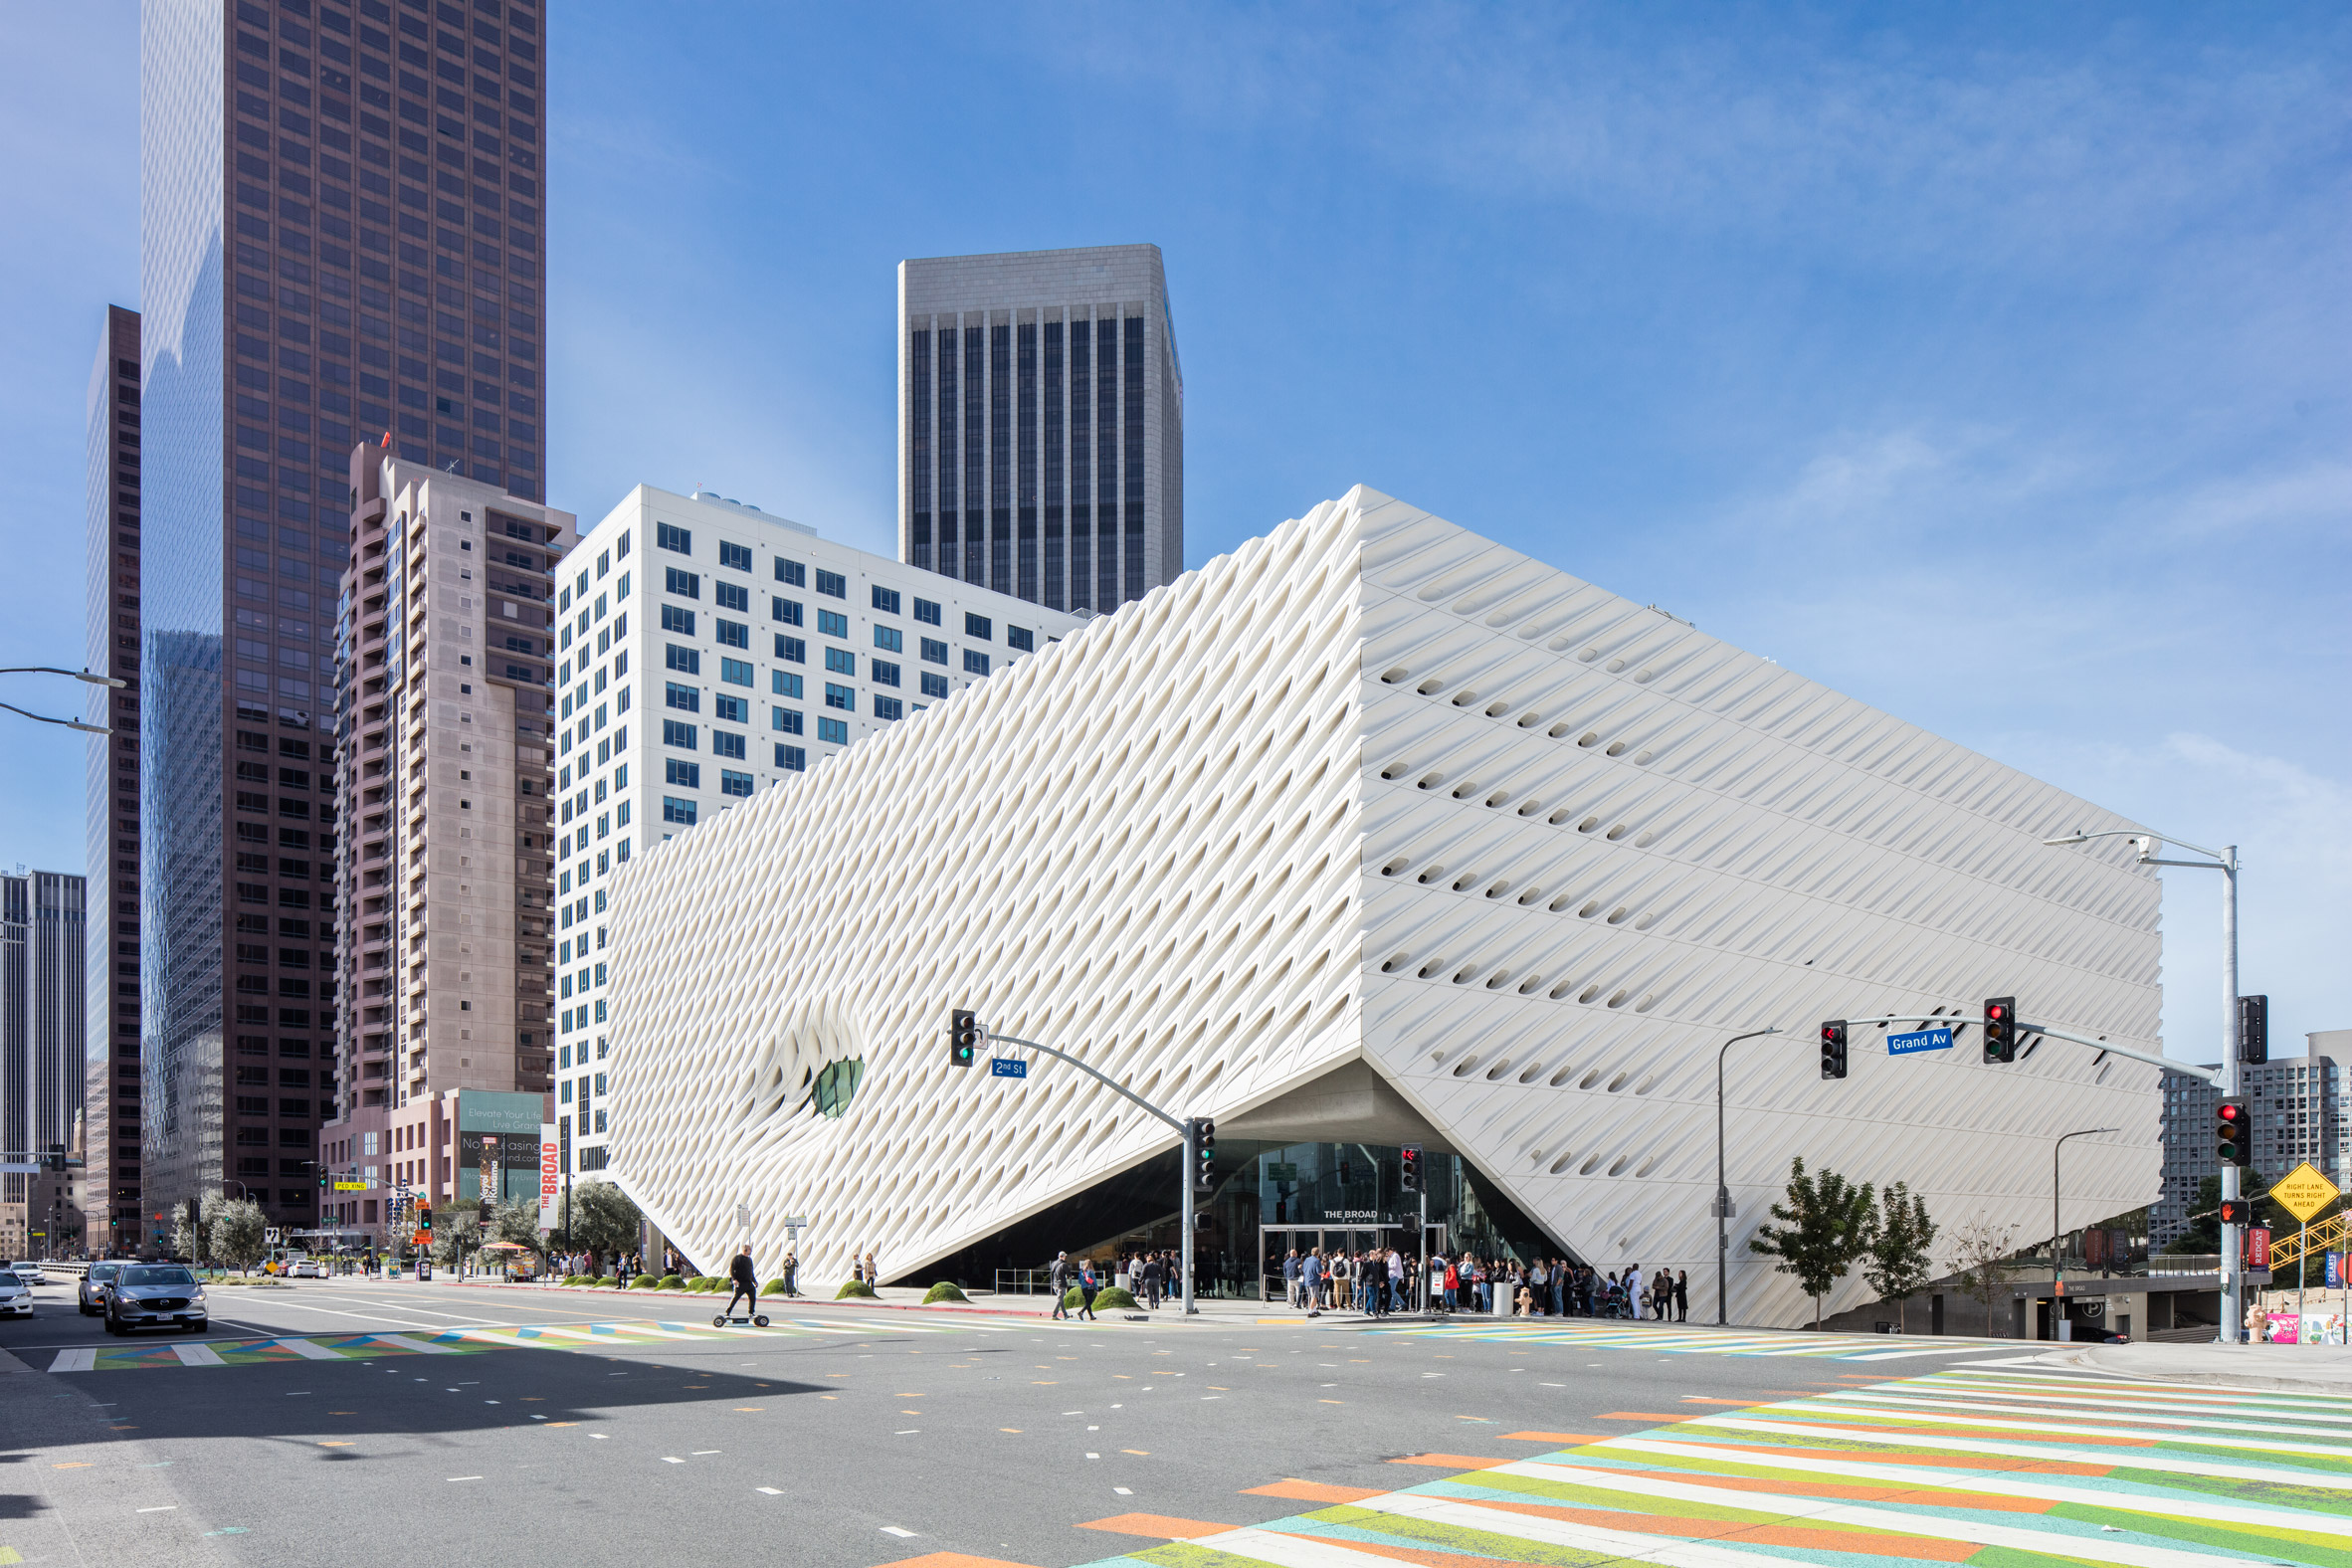 Front view of The Broad museum's exterior taken from a pedestrian's perspective